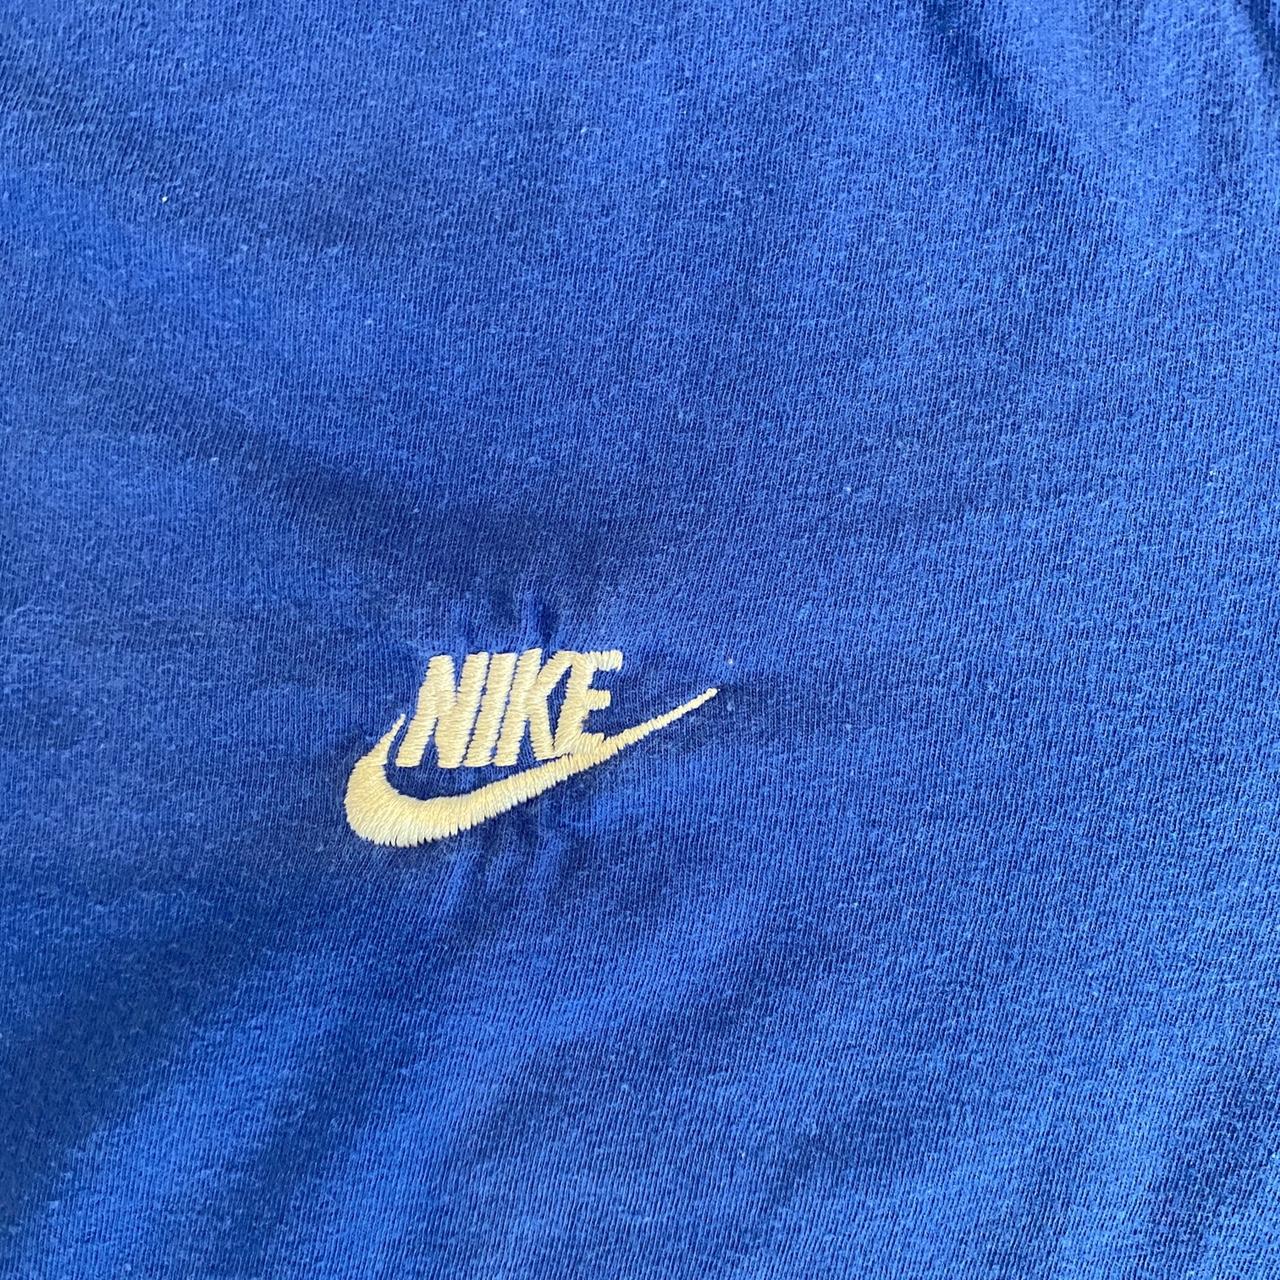 NIKE EMBROIDERED TEE BLUE Size XL Worn Item is... - Depop